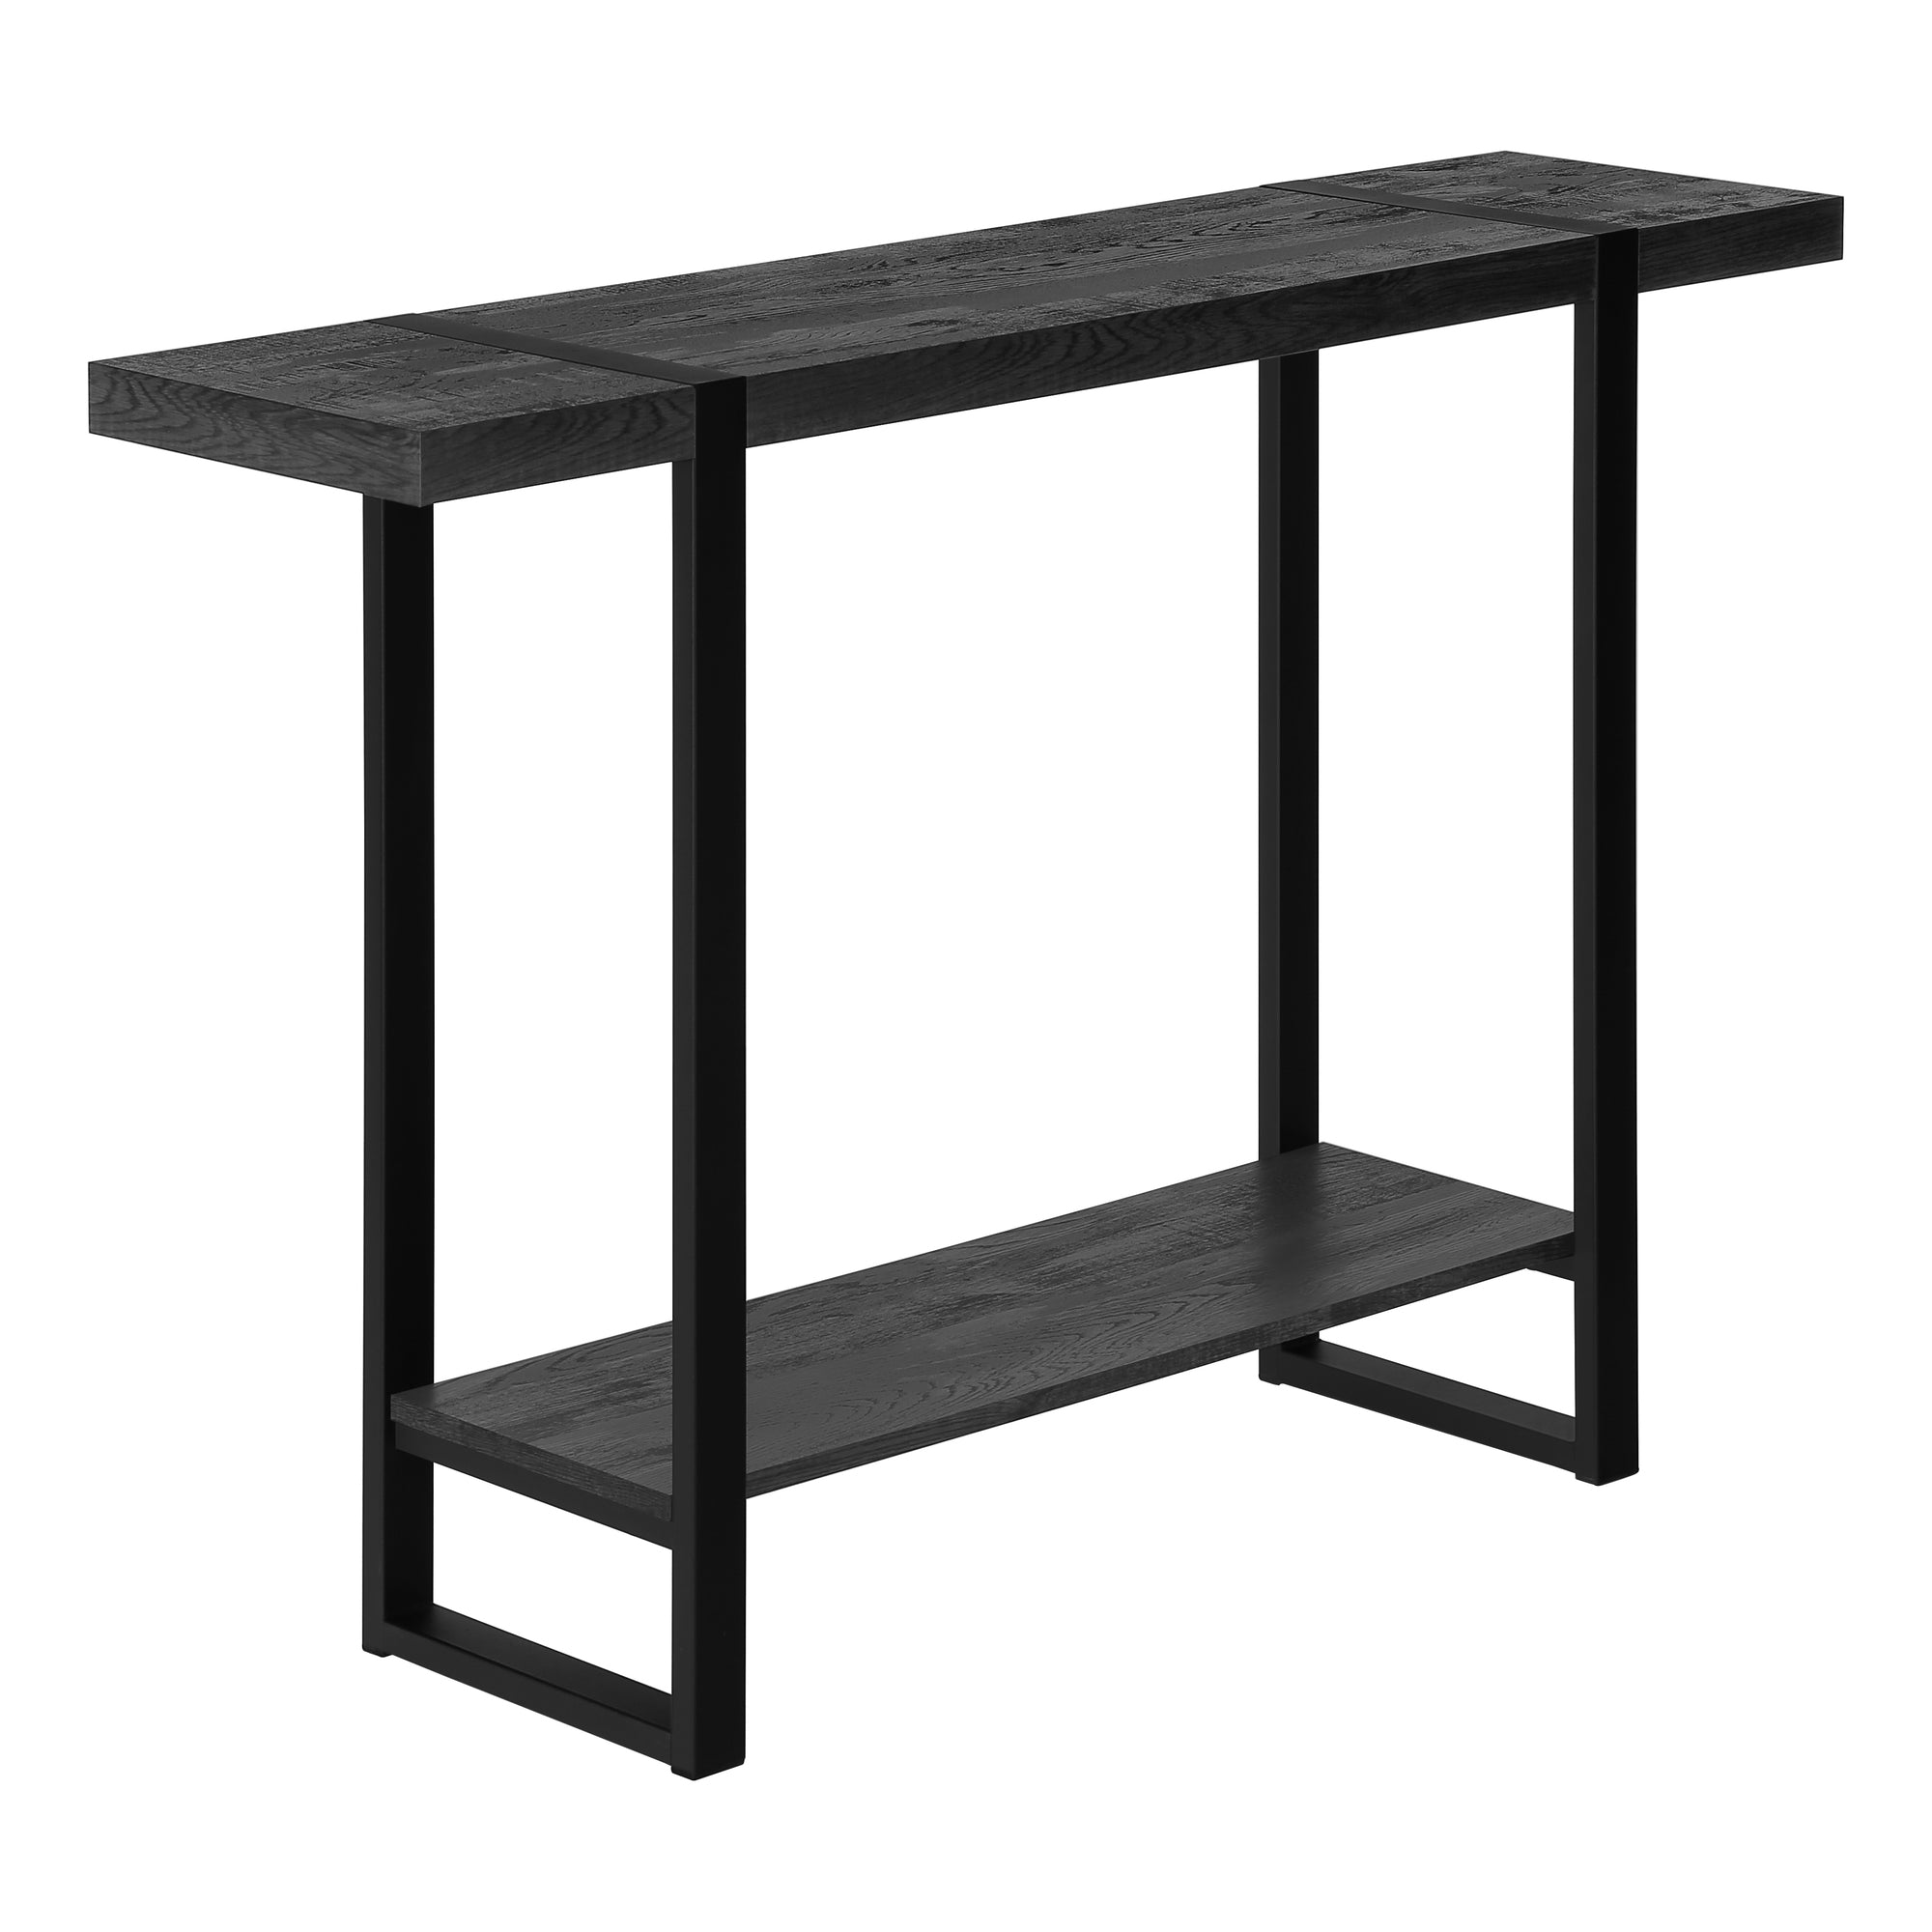 MN-642861    Accent Table, Console, Entryway, Narrow, Sofa, Living Room, Bedroom, Metal Legs, Laminate, Black Reclaimed Wood Look, Black, Contemporary, Industrial, Modern